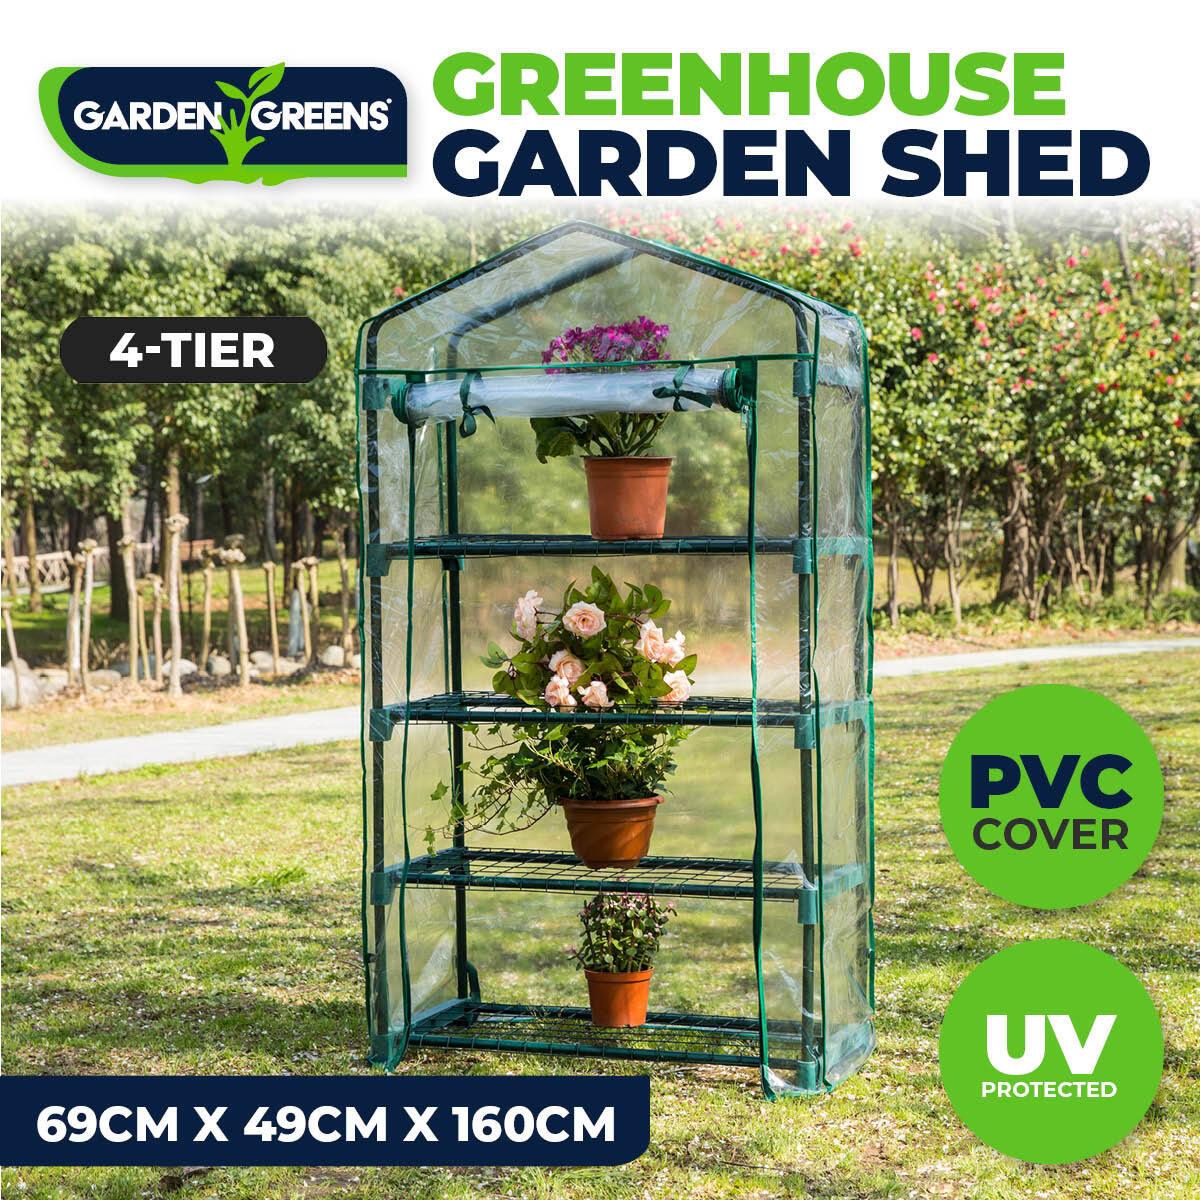 Garden Greens Greenhouse Shed 4 Tier UV Protected Cover Sturdy Structure 1.6m